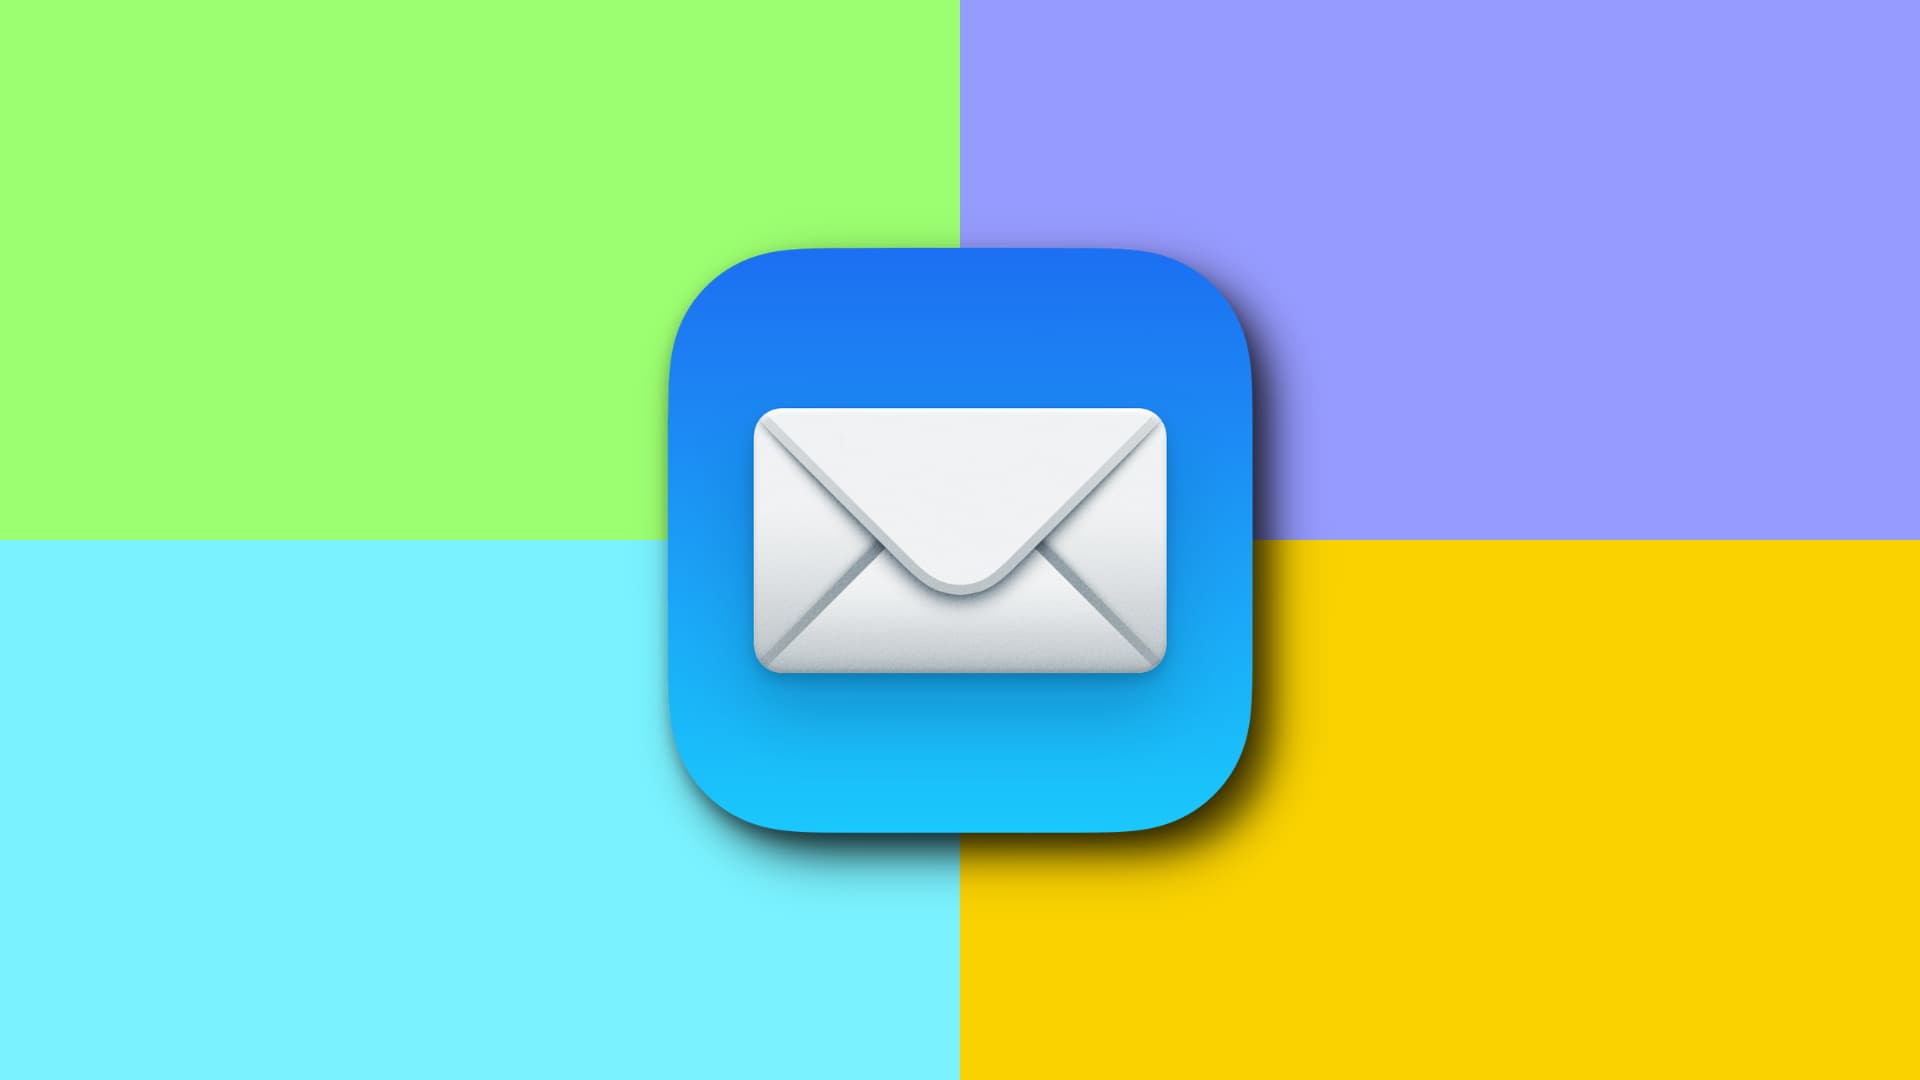 How To Change An Email’s Background Color In Apple Mail’s Inbox